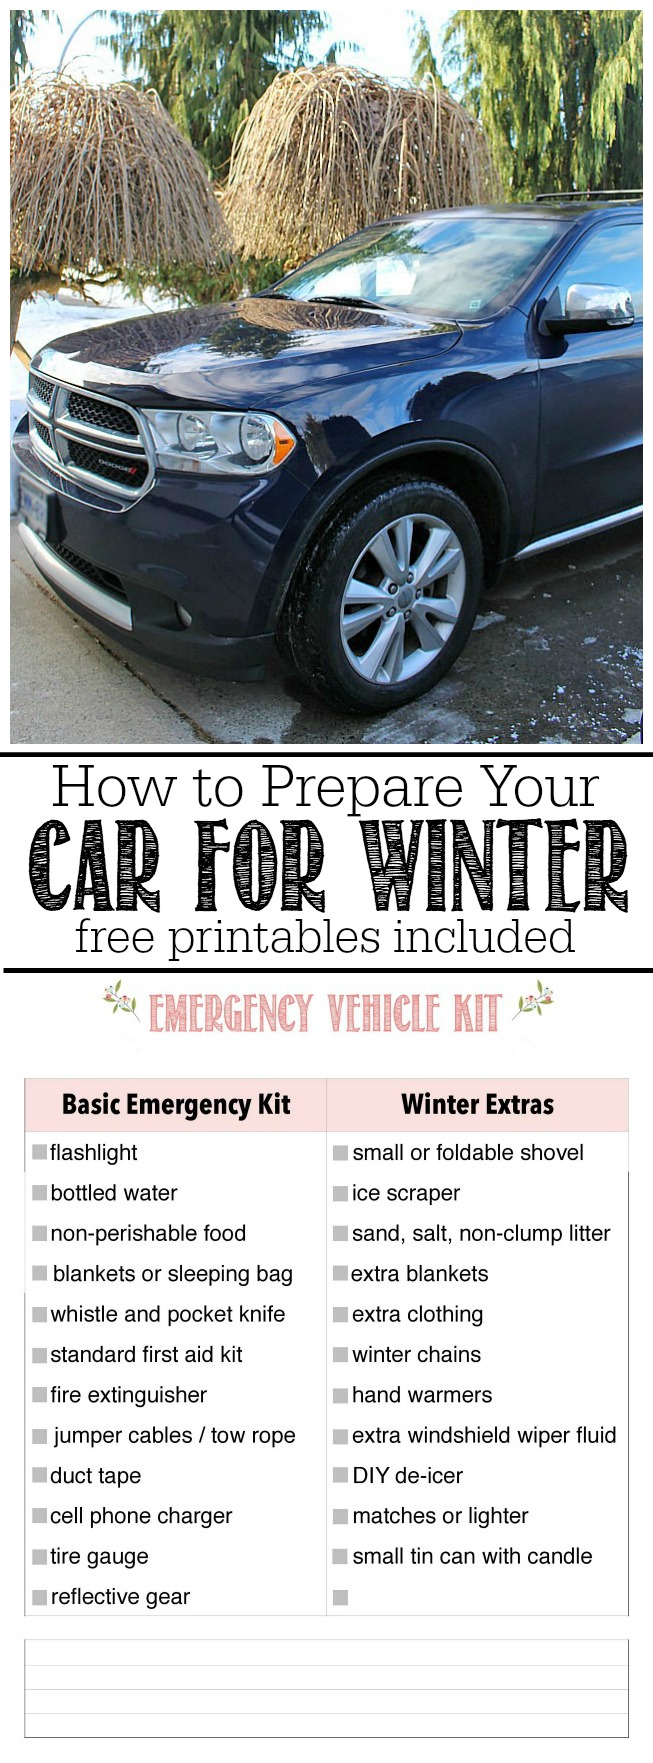 How to prepare an emergency kit for your care and prepare your car for winter driving. Stay safe! Free printables for family binder included.